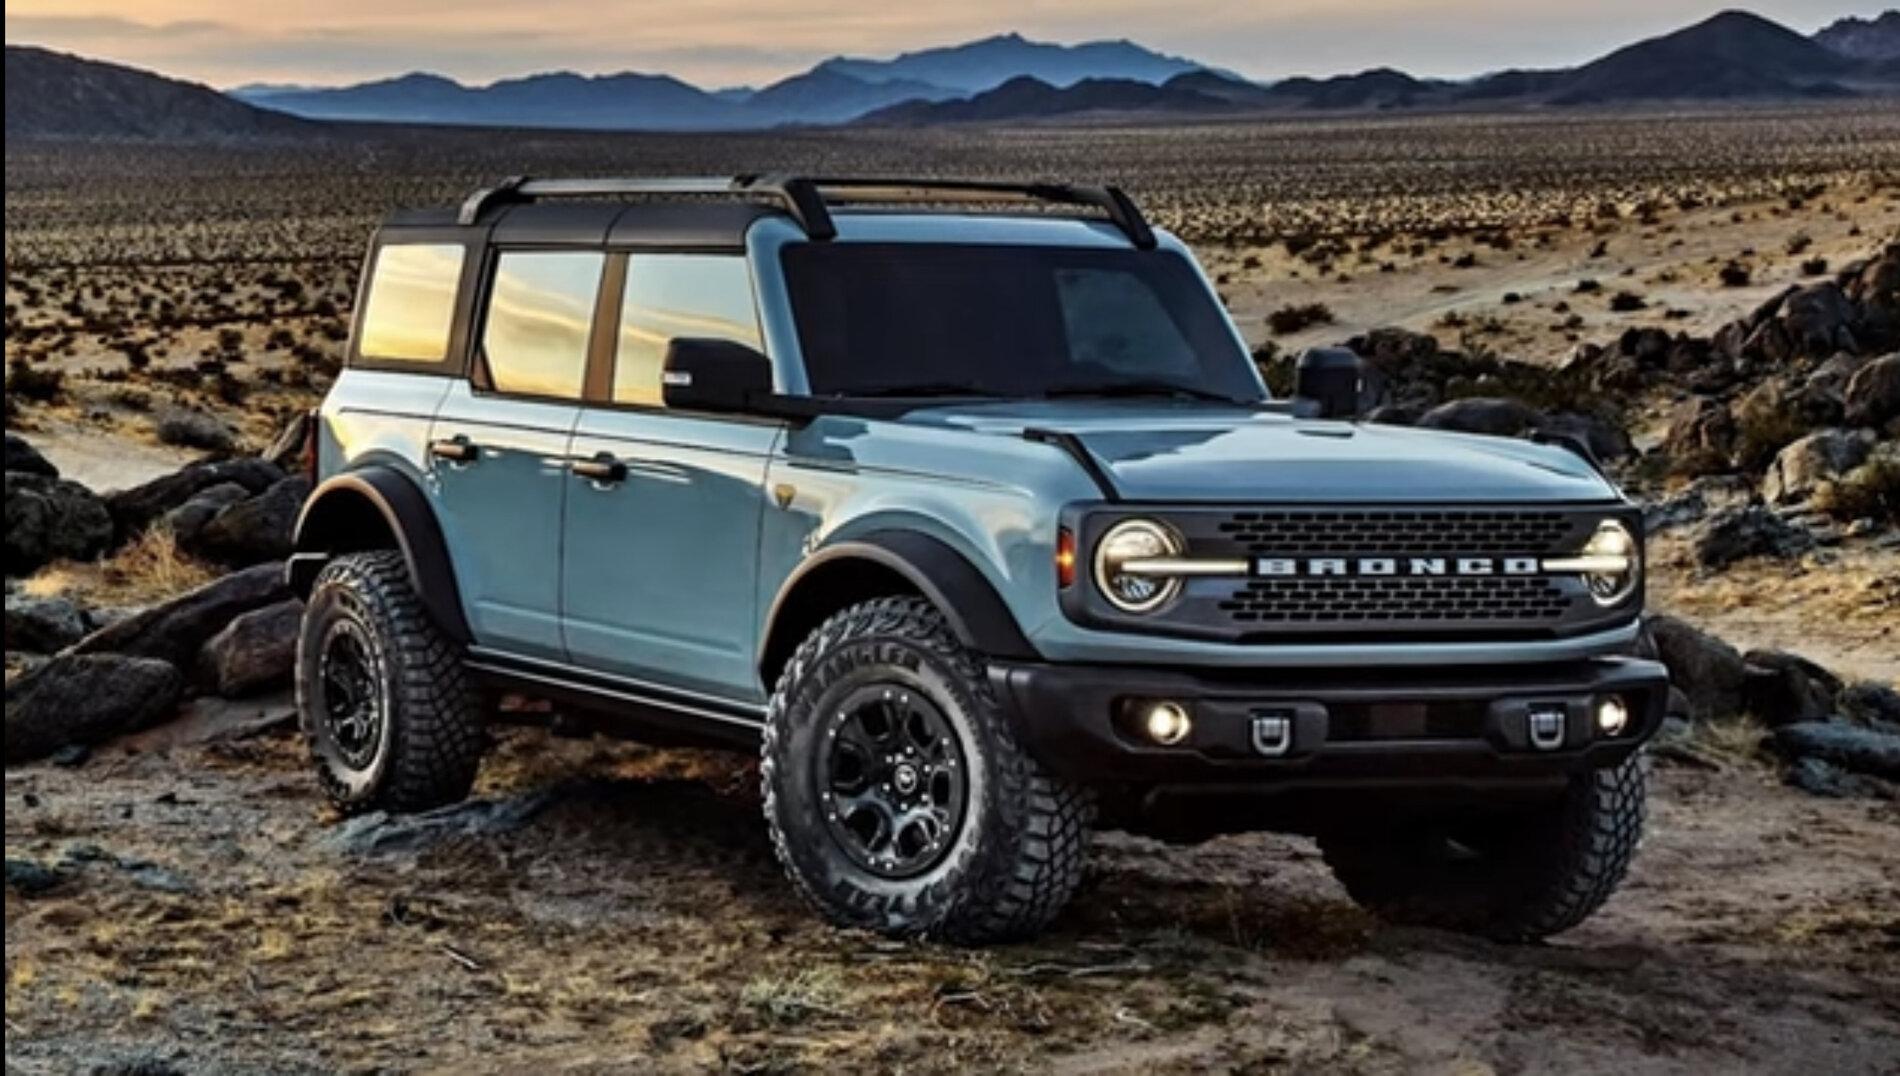 Ford Bronco Unpopular Opinion: I don’t mind the MIC Top BE708573-A86C-4A8C-990E-E2C4EA18DBC6